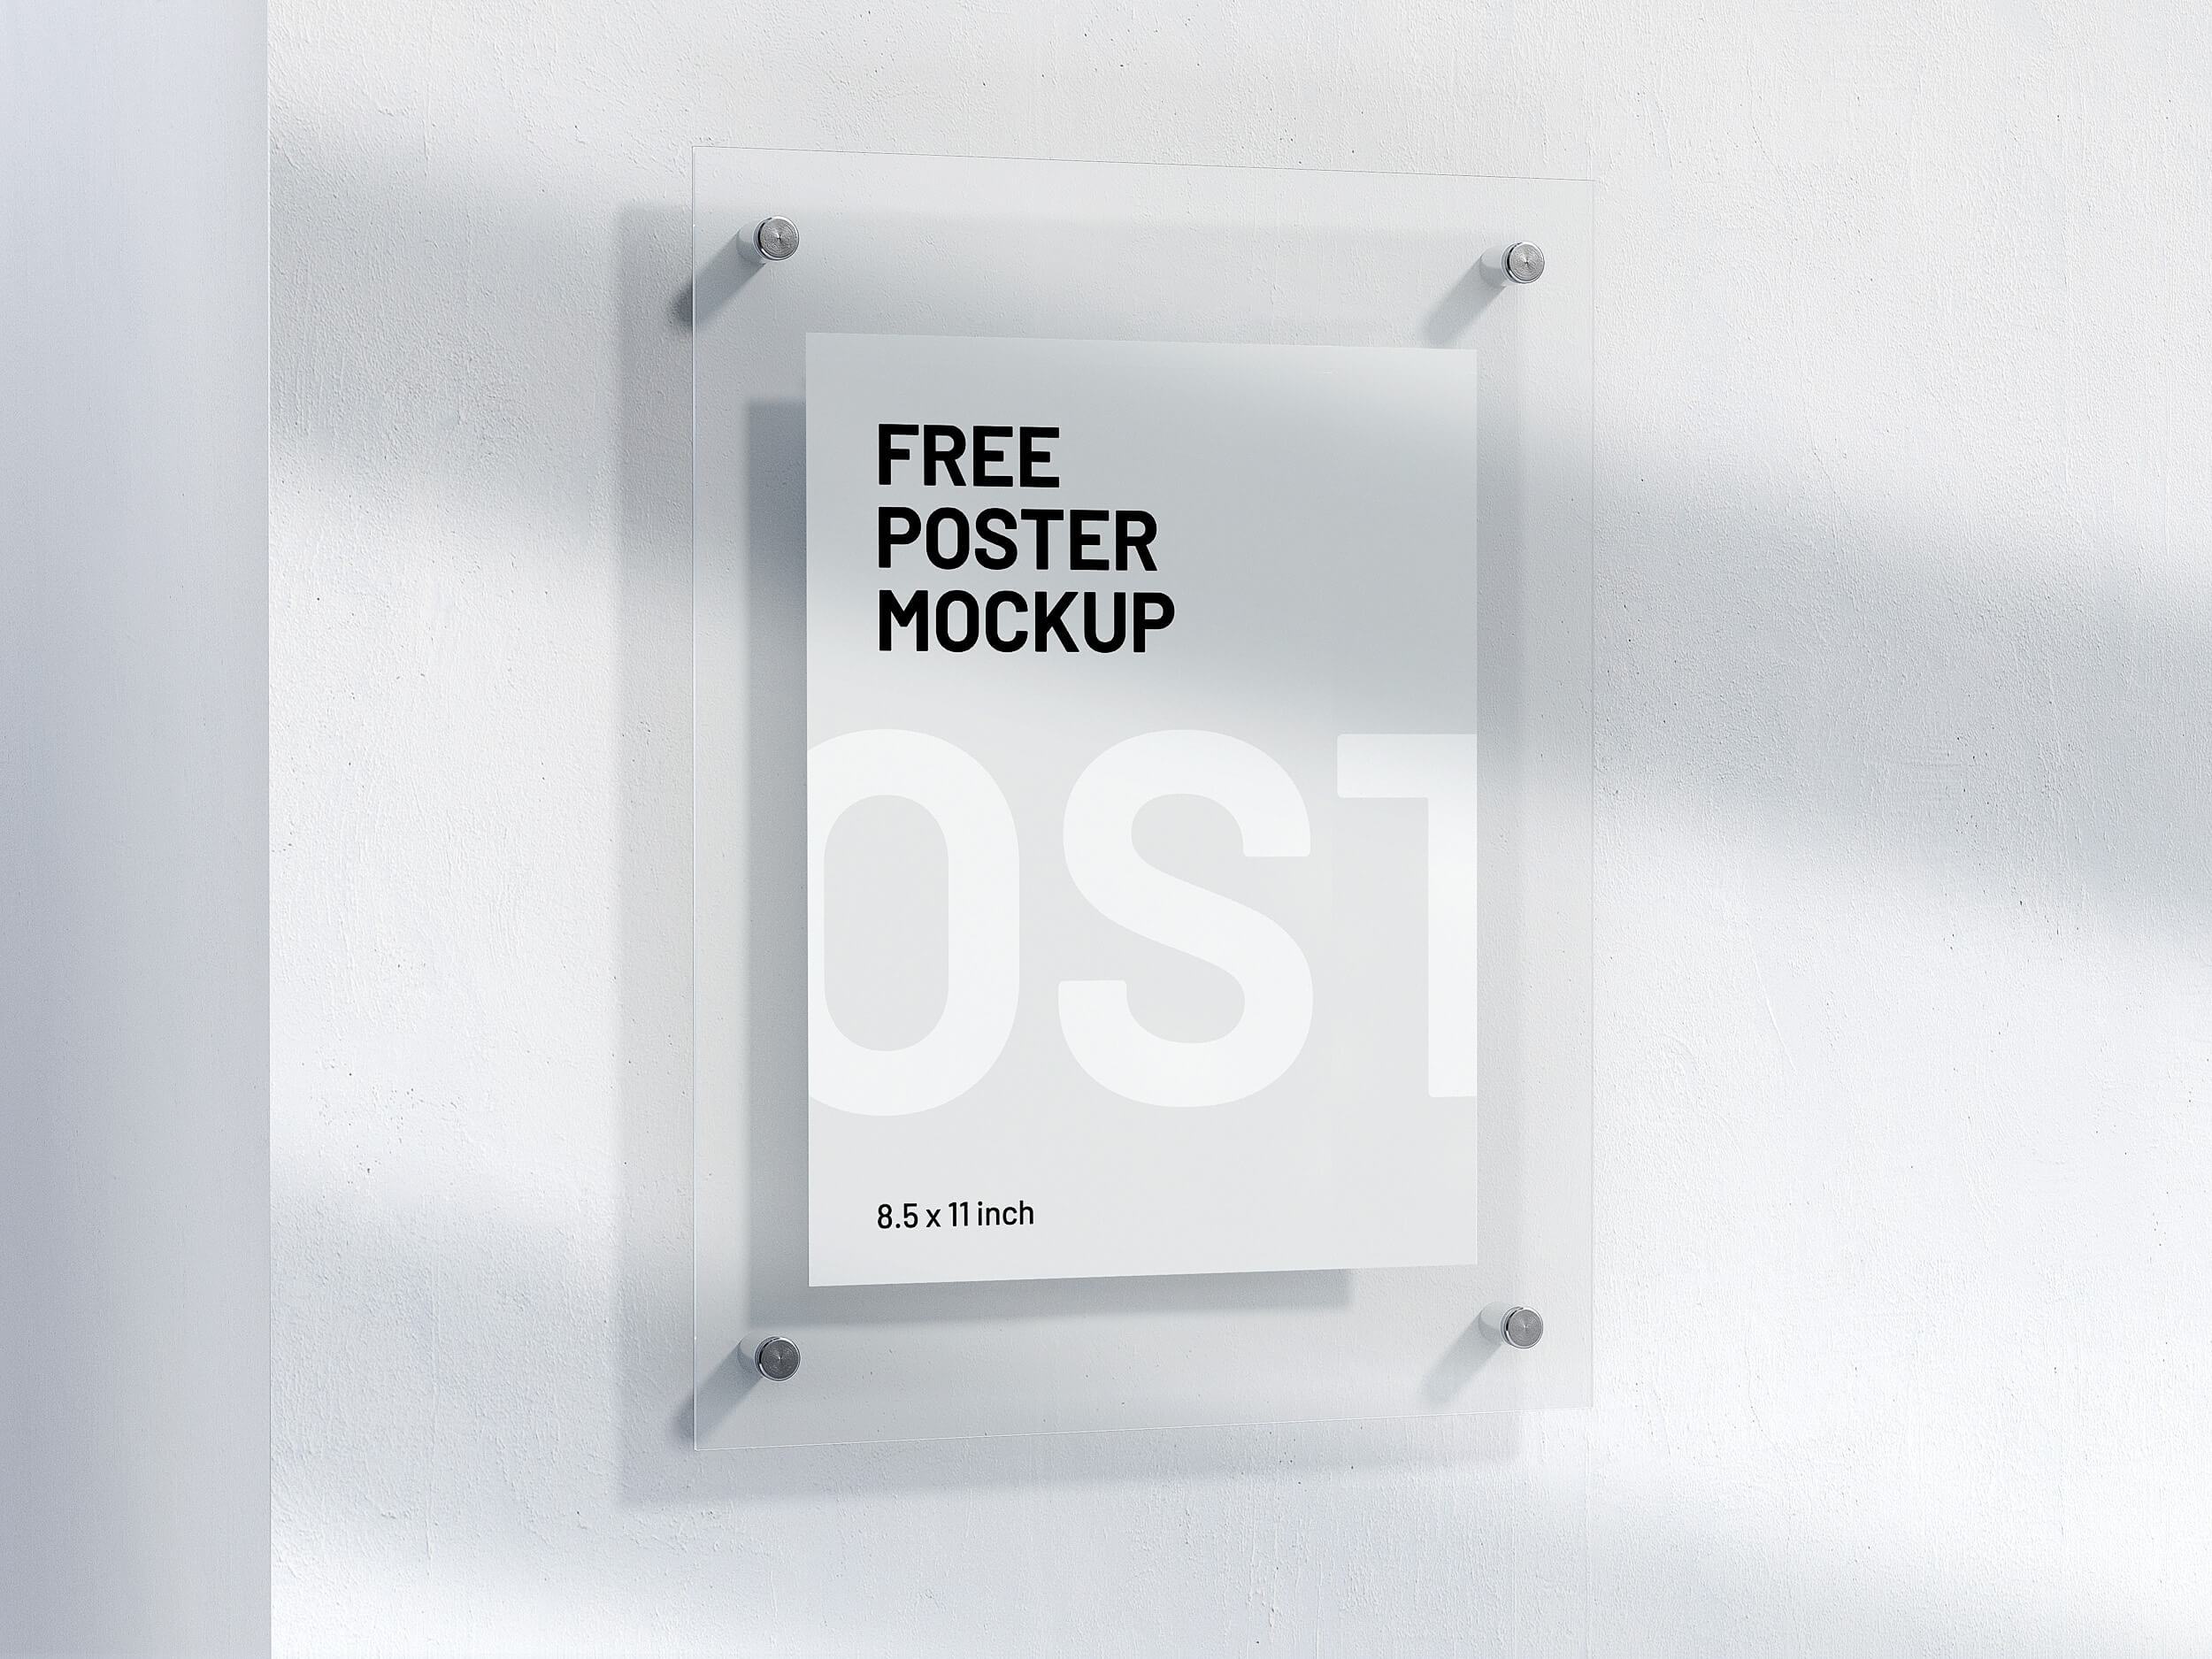 Free Letter Size Poster Mockup PSD Free Download